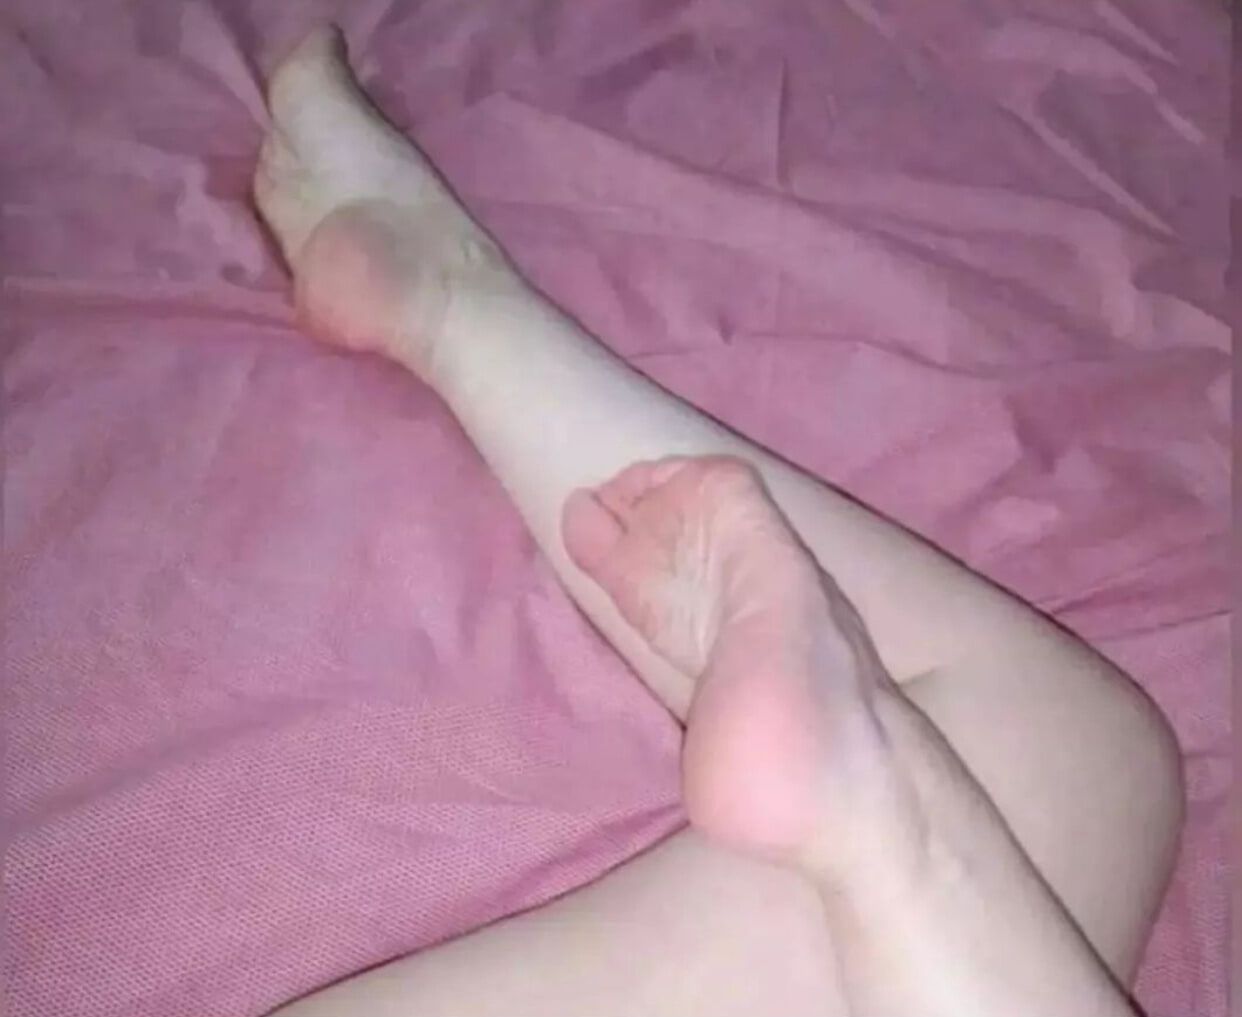 If I have my feet this beautiful and pink then imagine how I